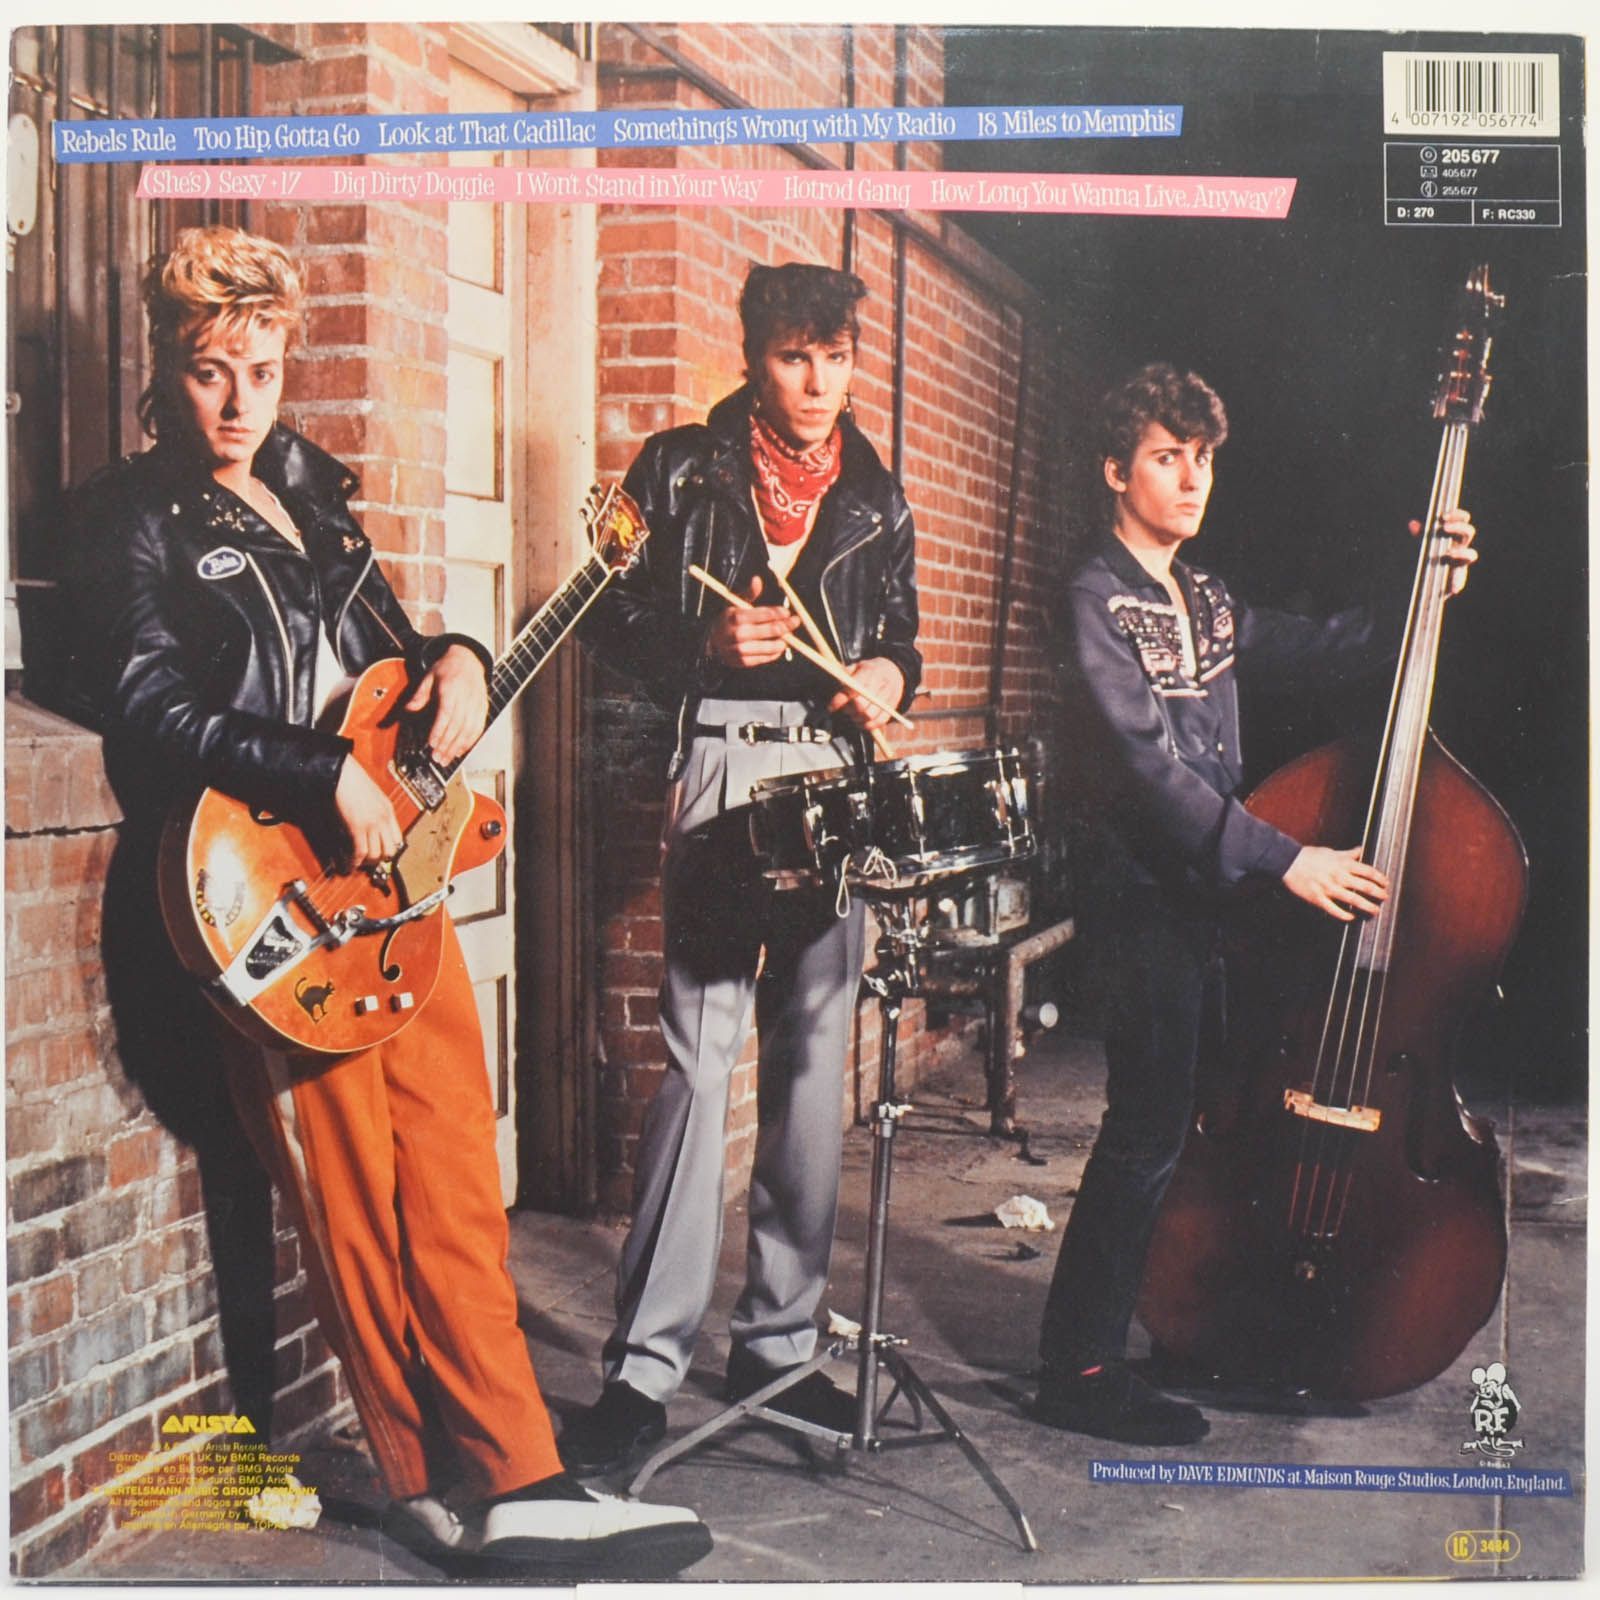 Stray Cats — Rant N' Rave With The Stray Cats, 1983